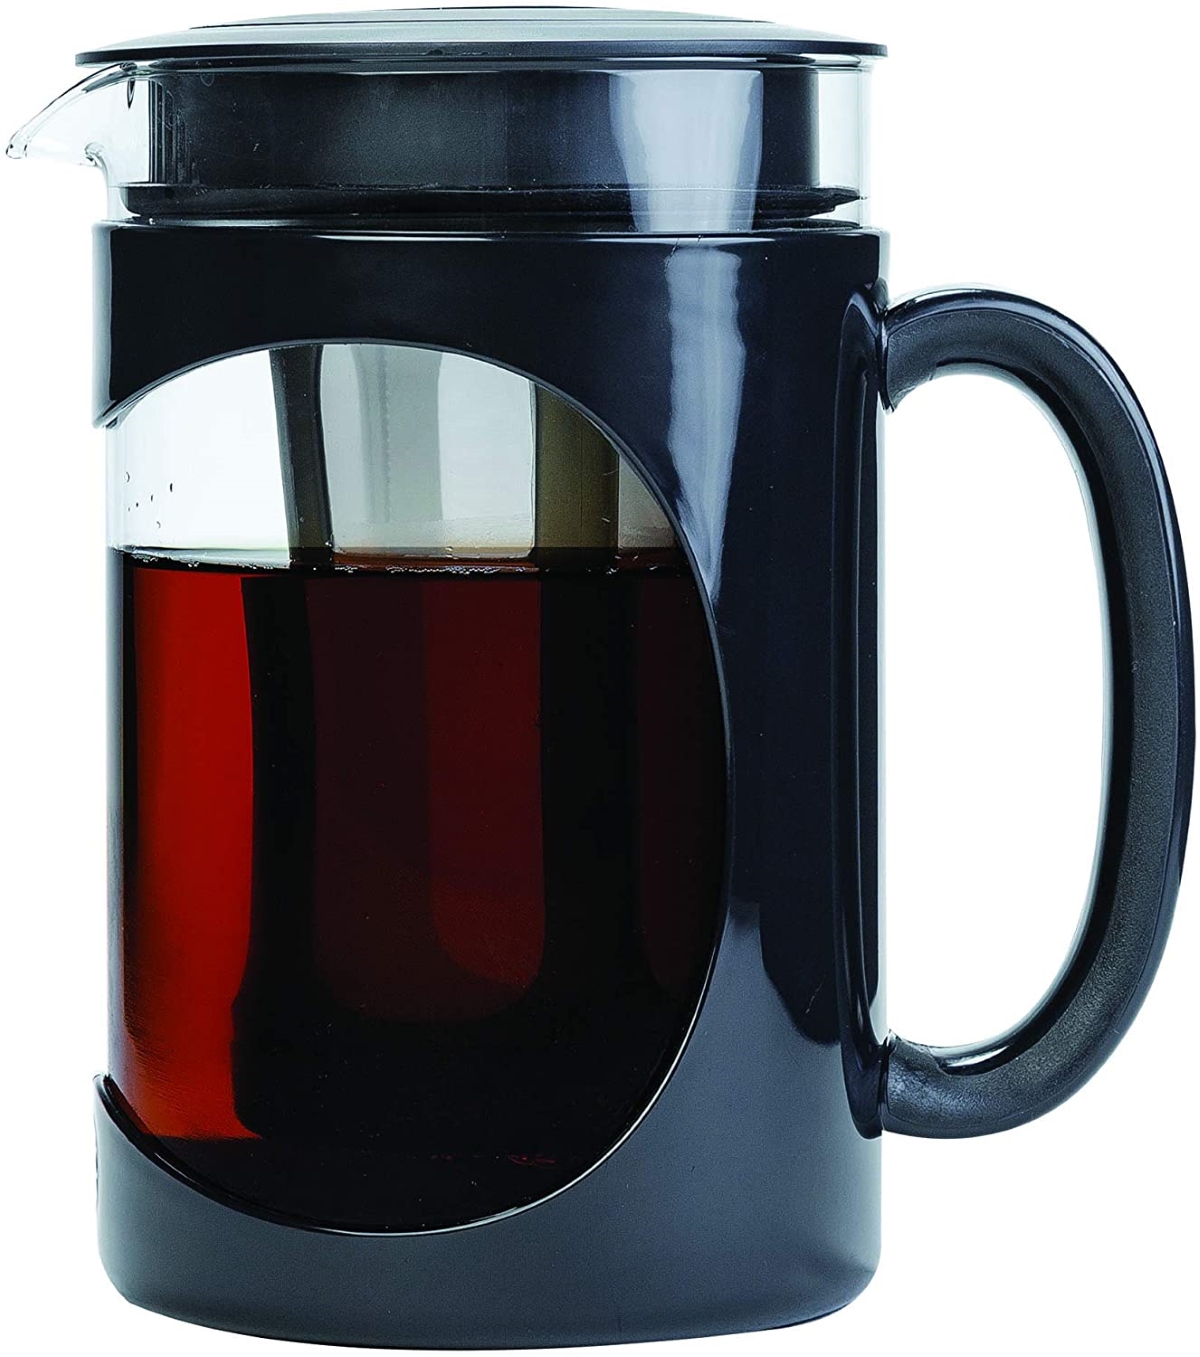 types of coffee makers - clear cold brew coffee pot